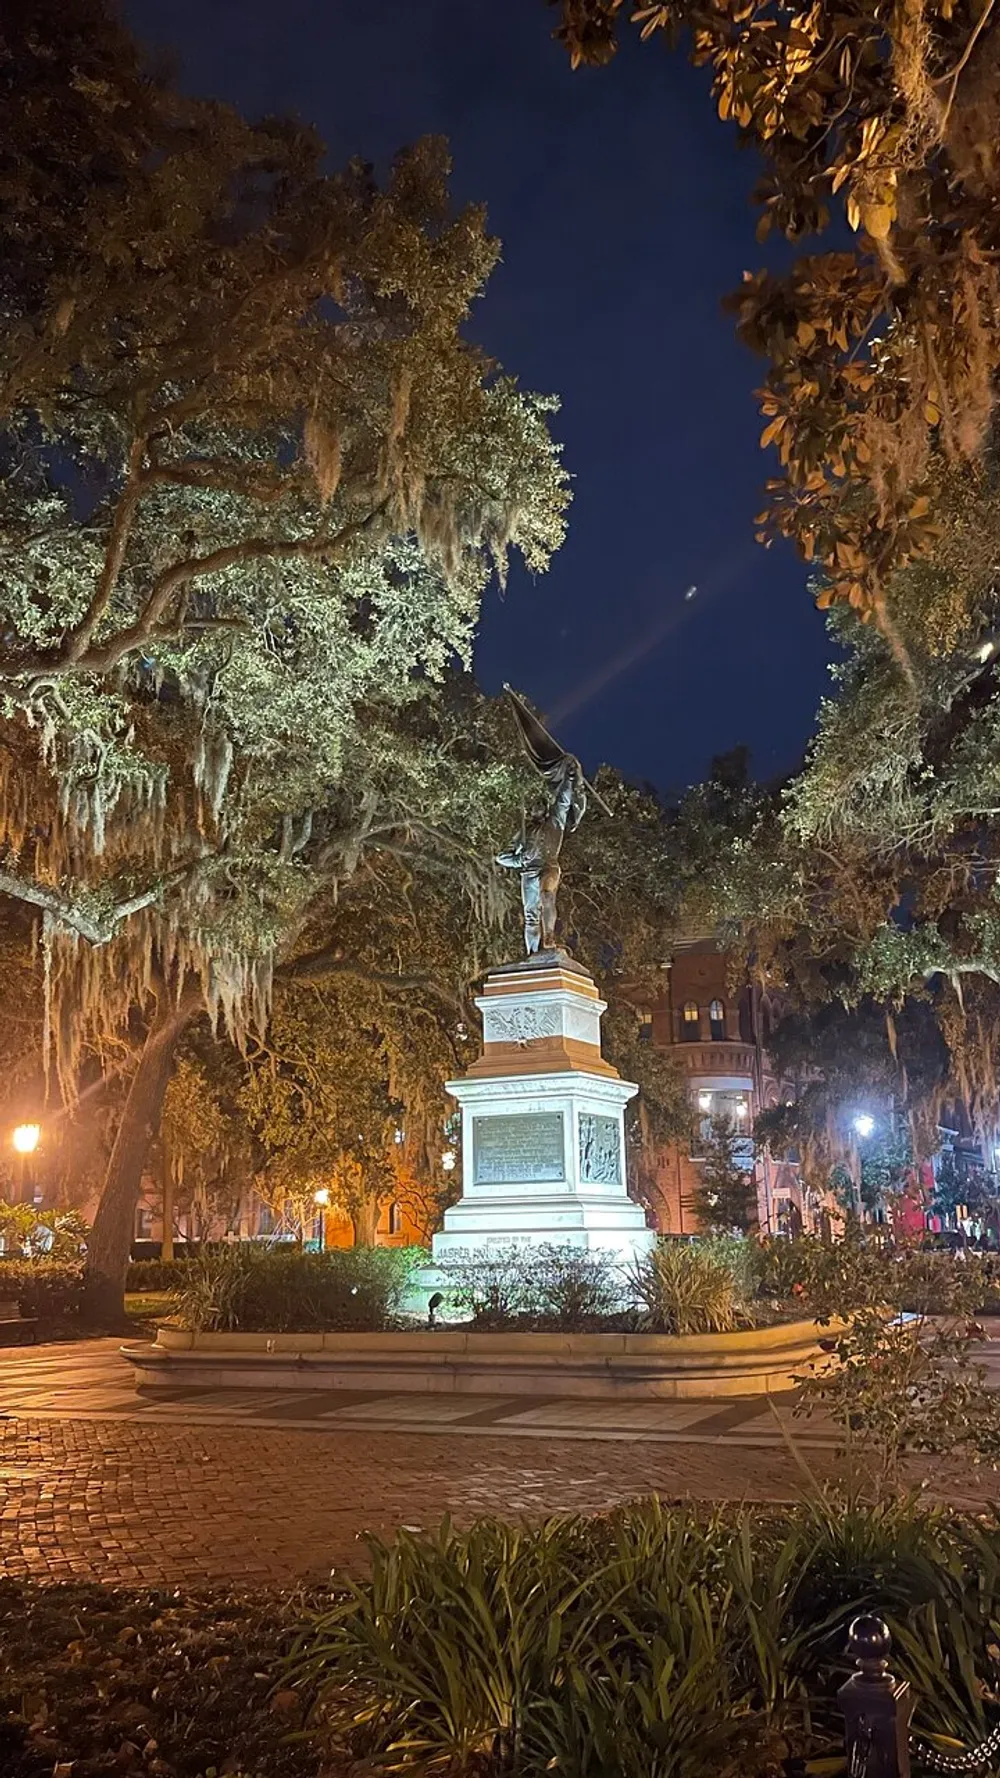 The image depicts a nighttime scene of a statue on a pedestal surrounded by a lush garden with overhanging trees draped in Spanish moss illuminated by nearby streetlamps